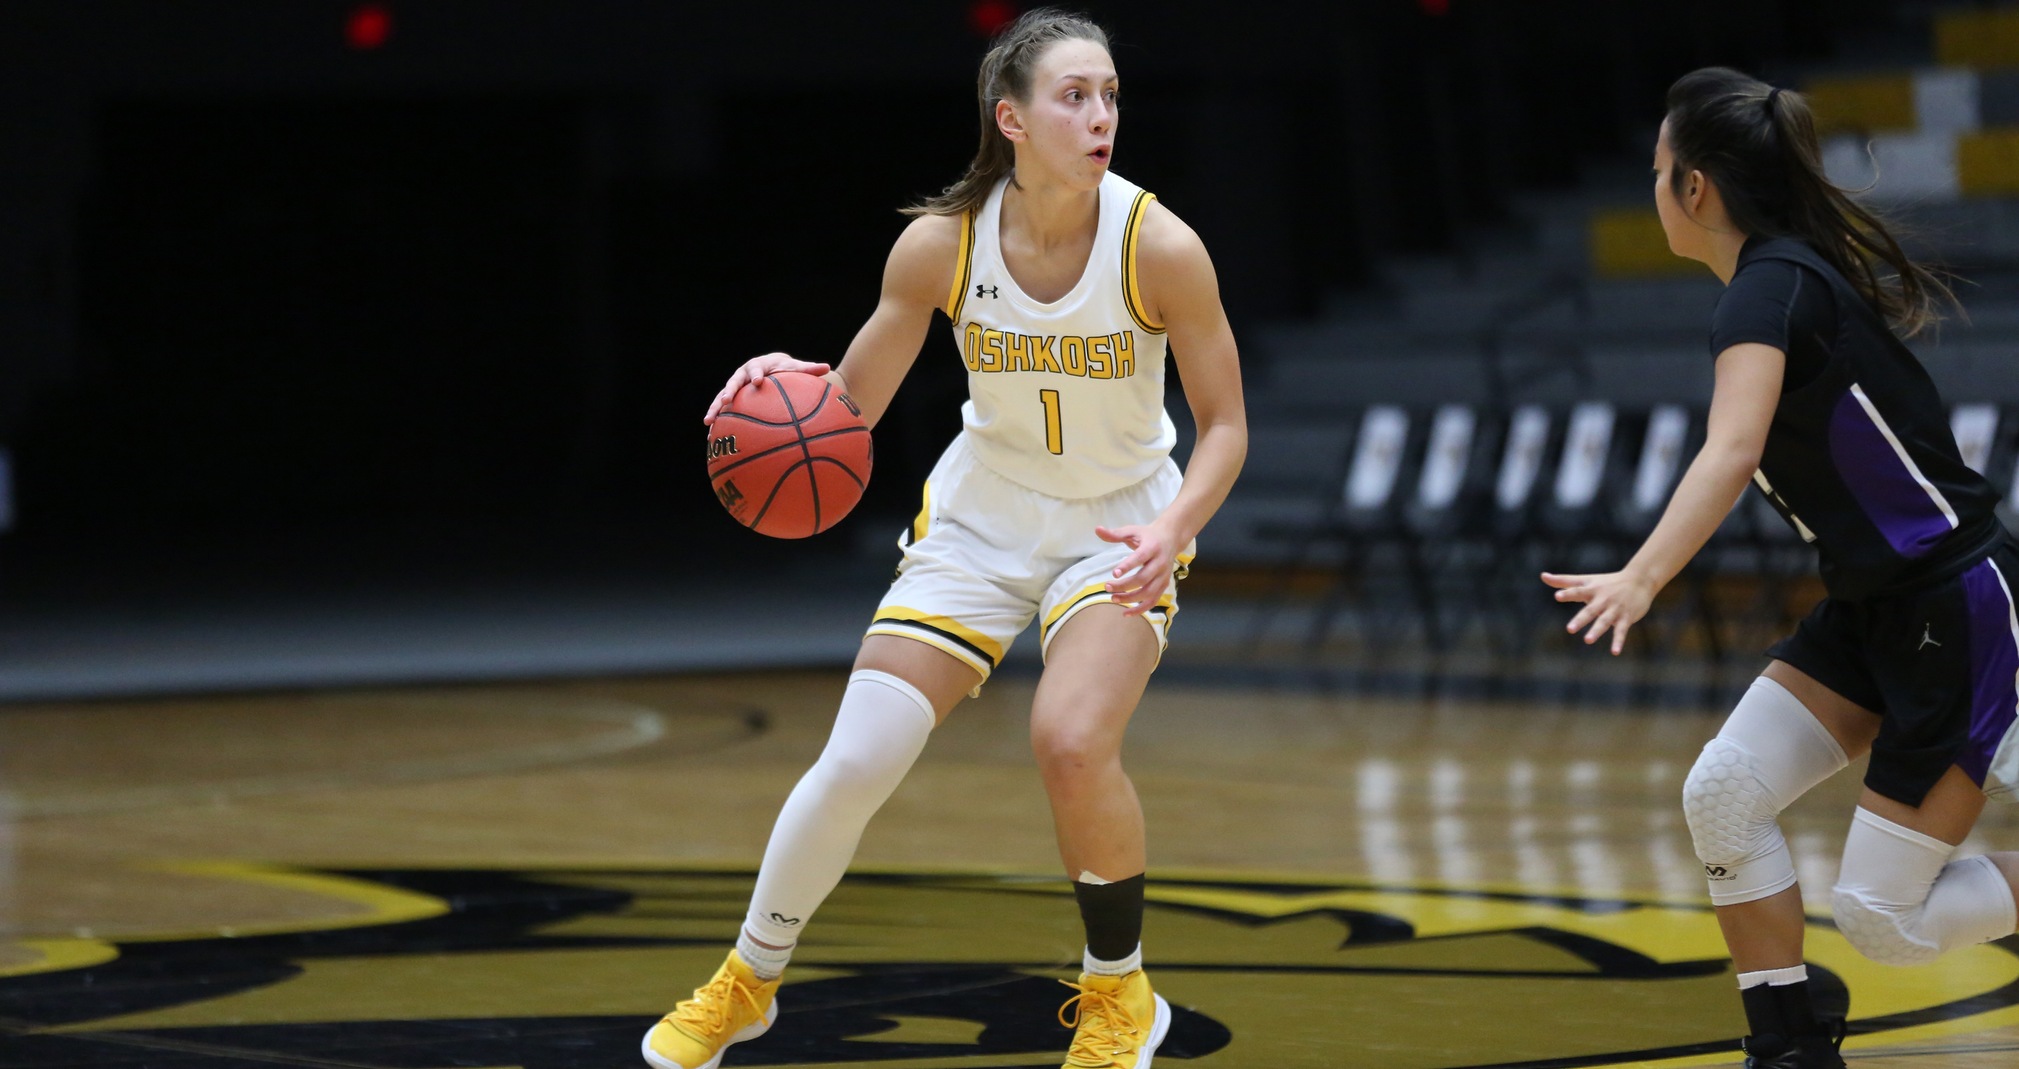 Olivia Campbell scored eight points with six rebounds and three assists against the Pioneers.